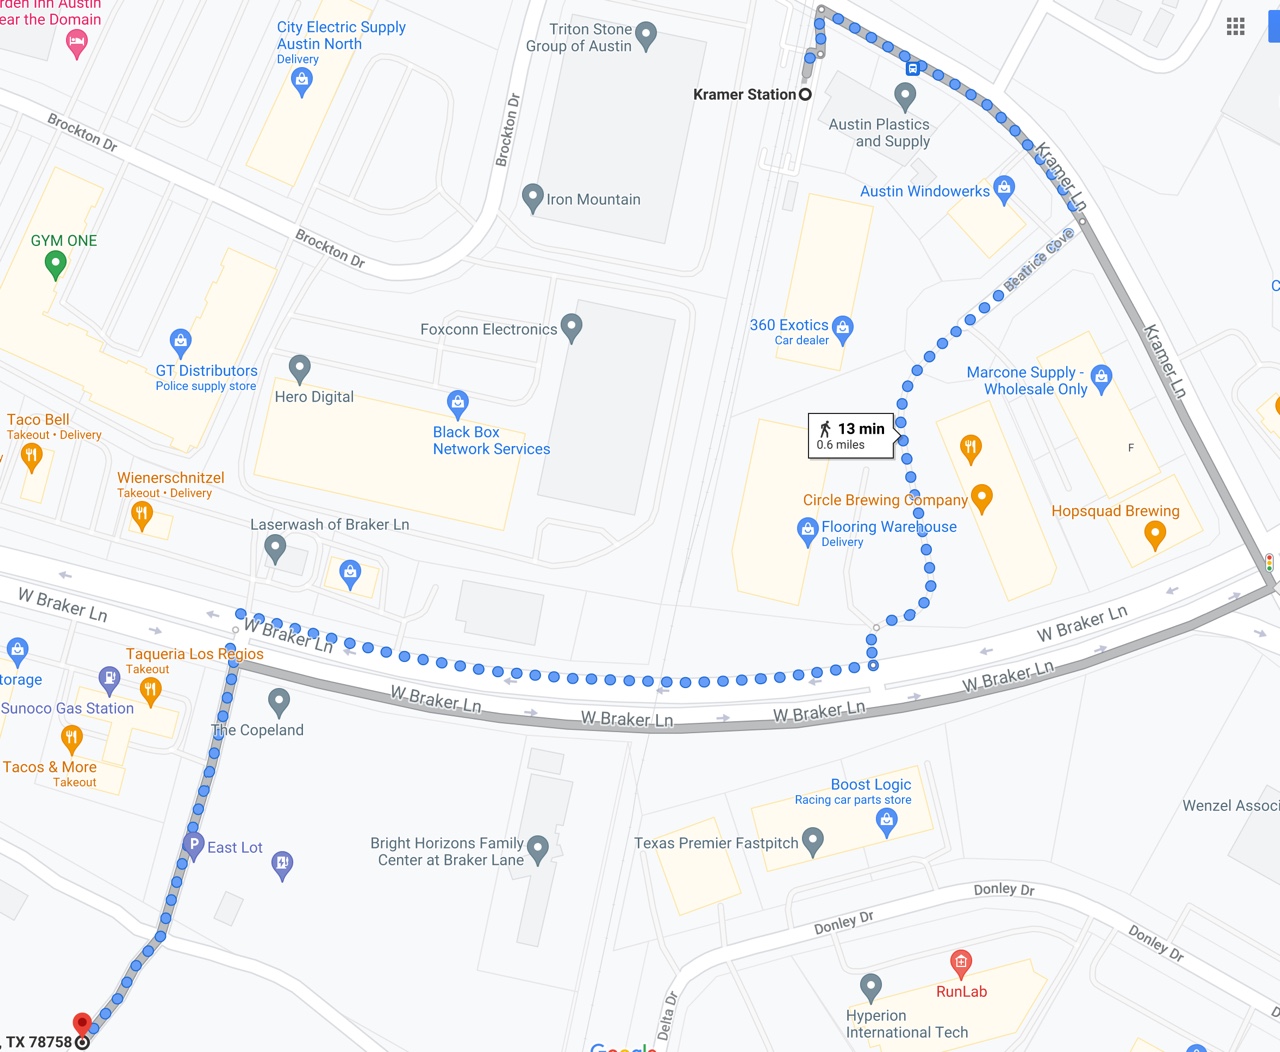 Map of walking route described in this post, from Kramer Station to McKalla Place (Q2) Stadium